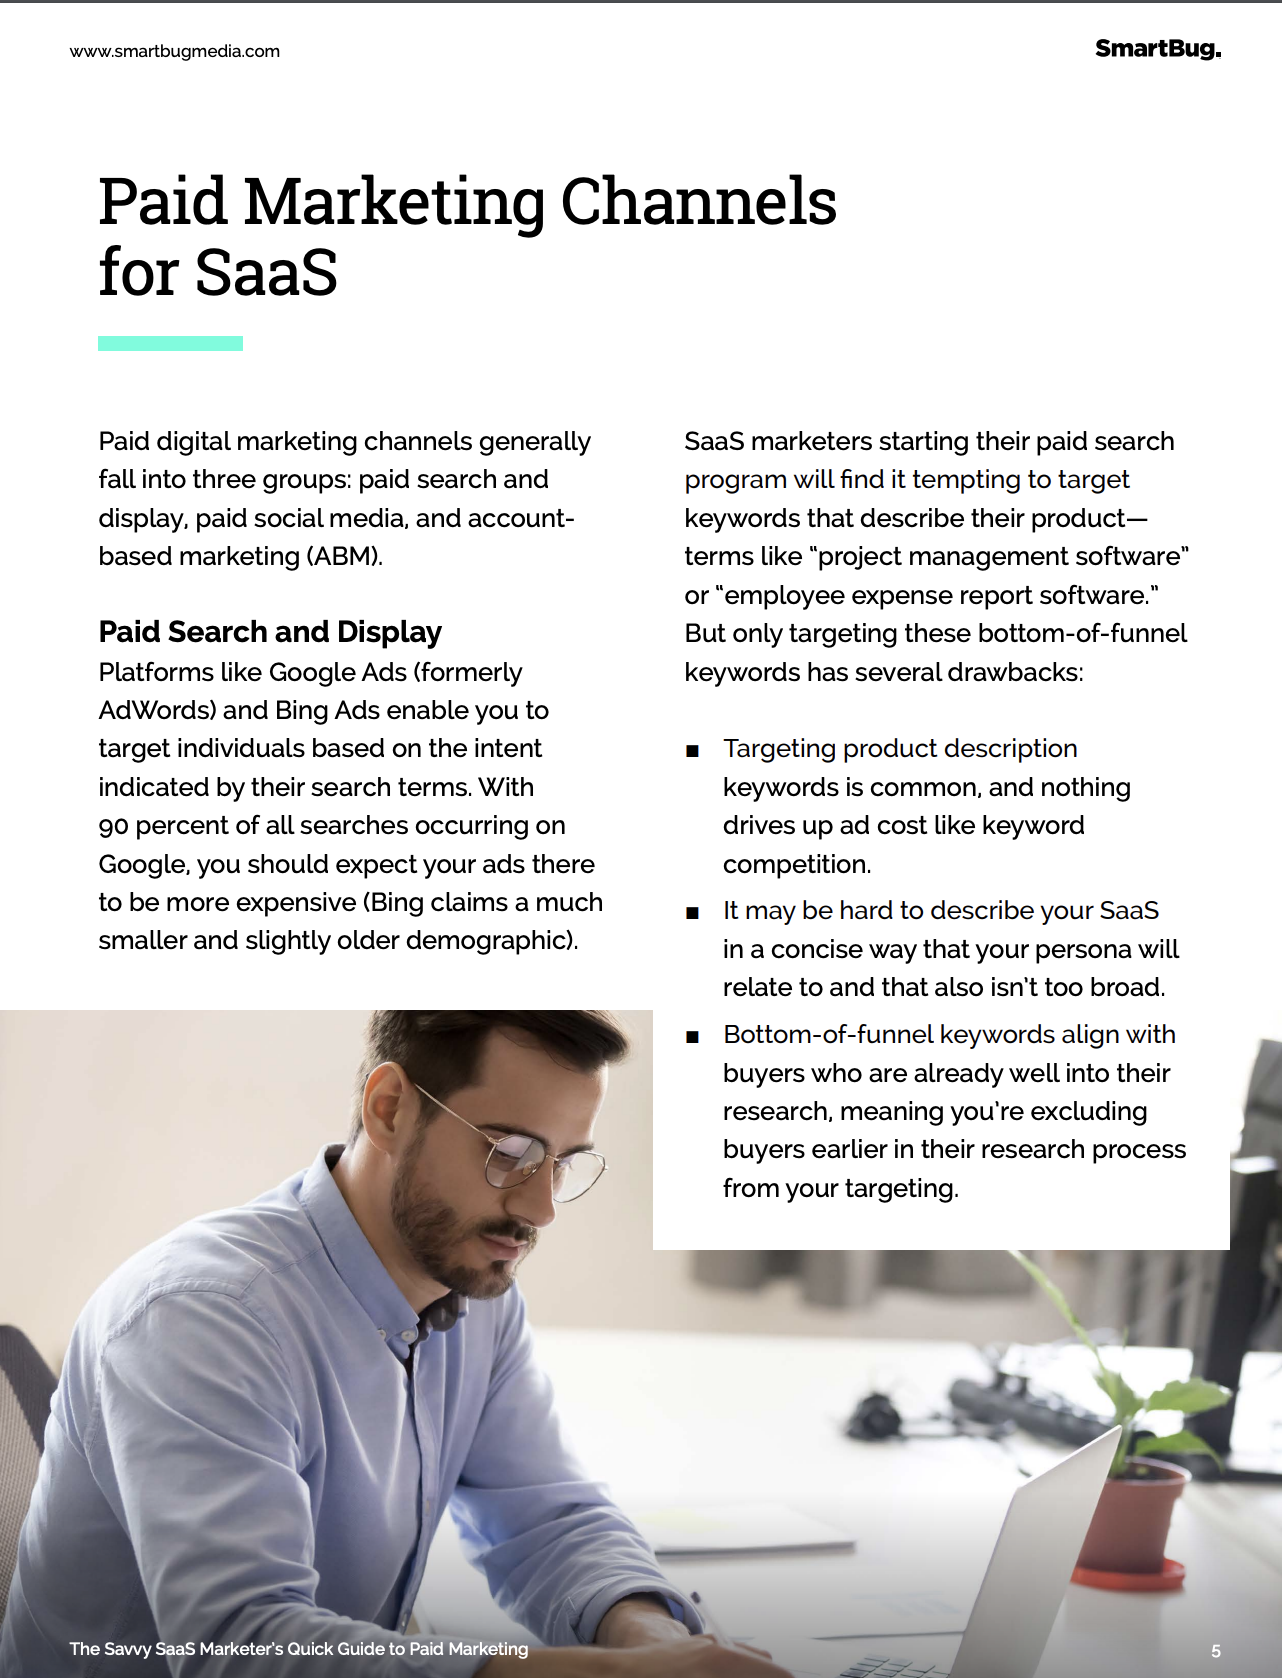 Paid channels for SaaS